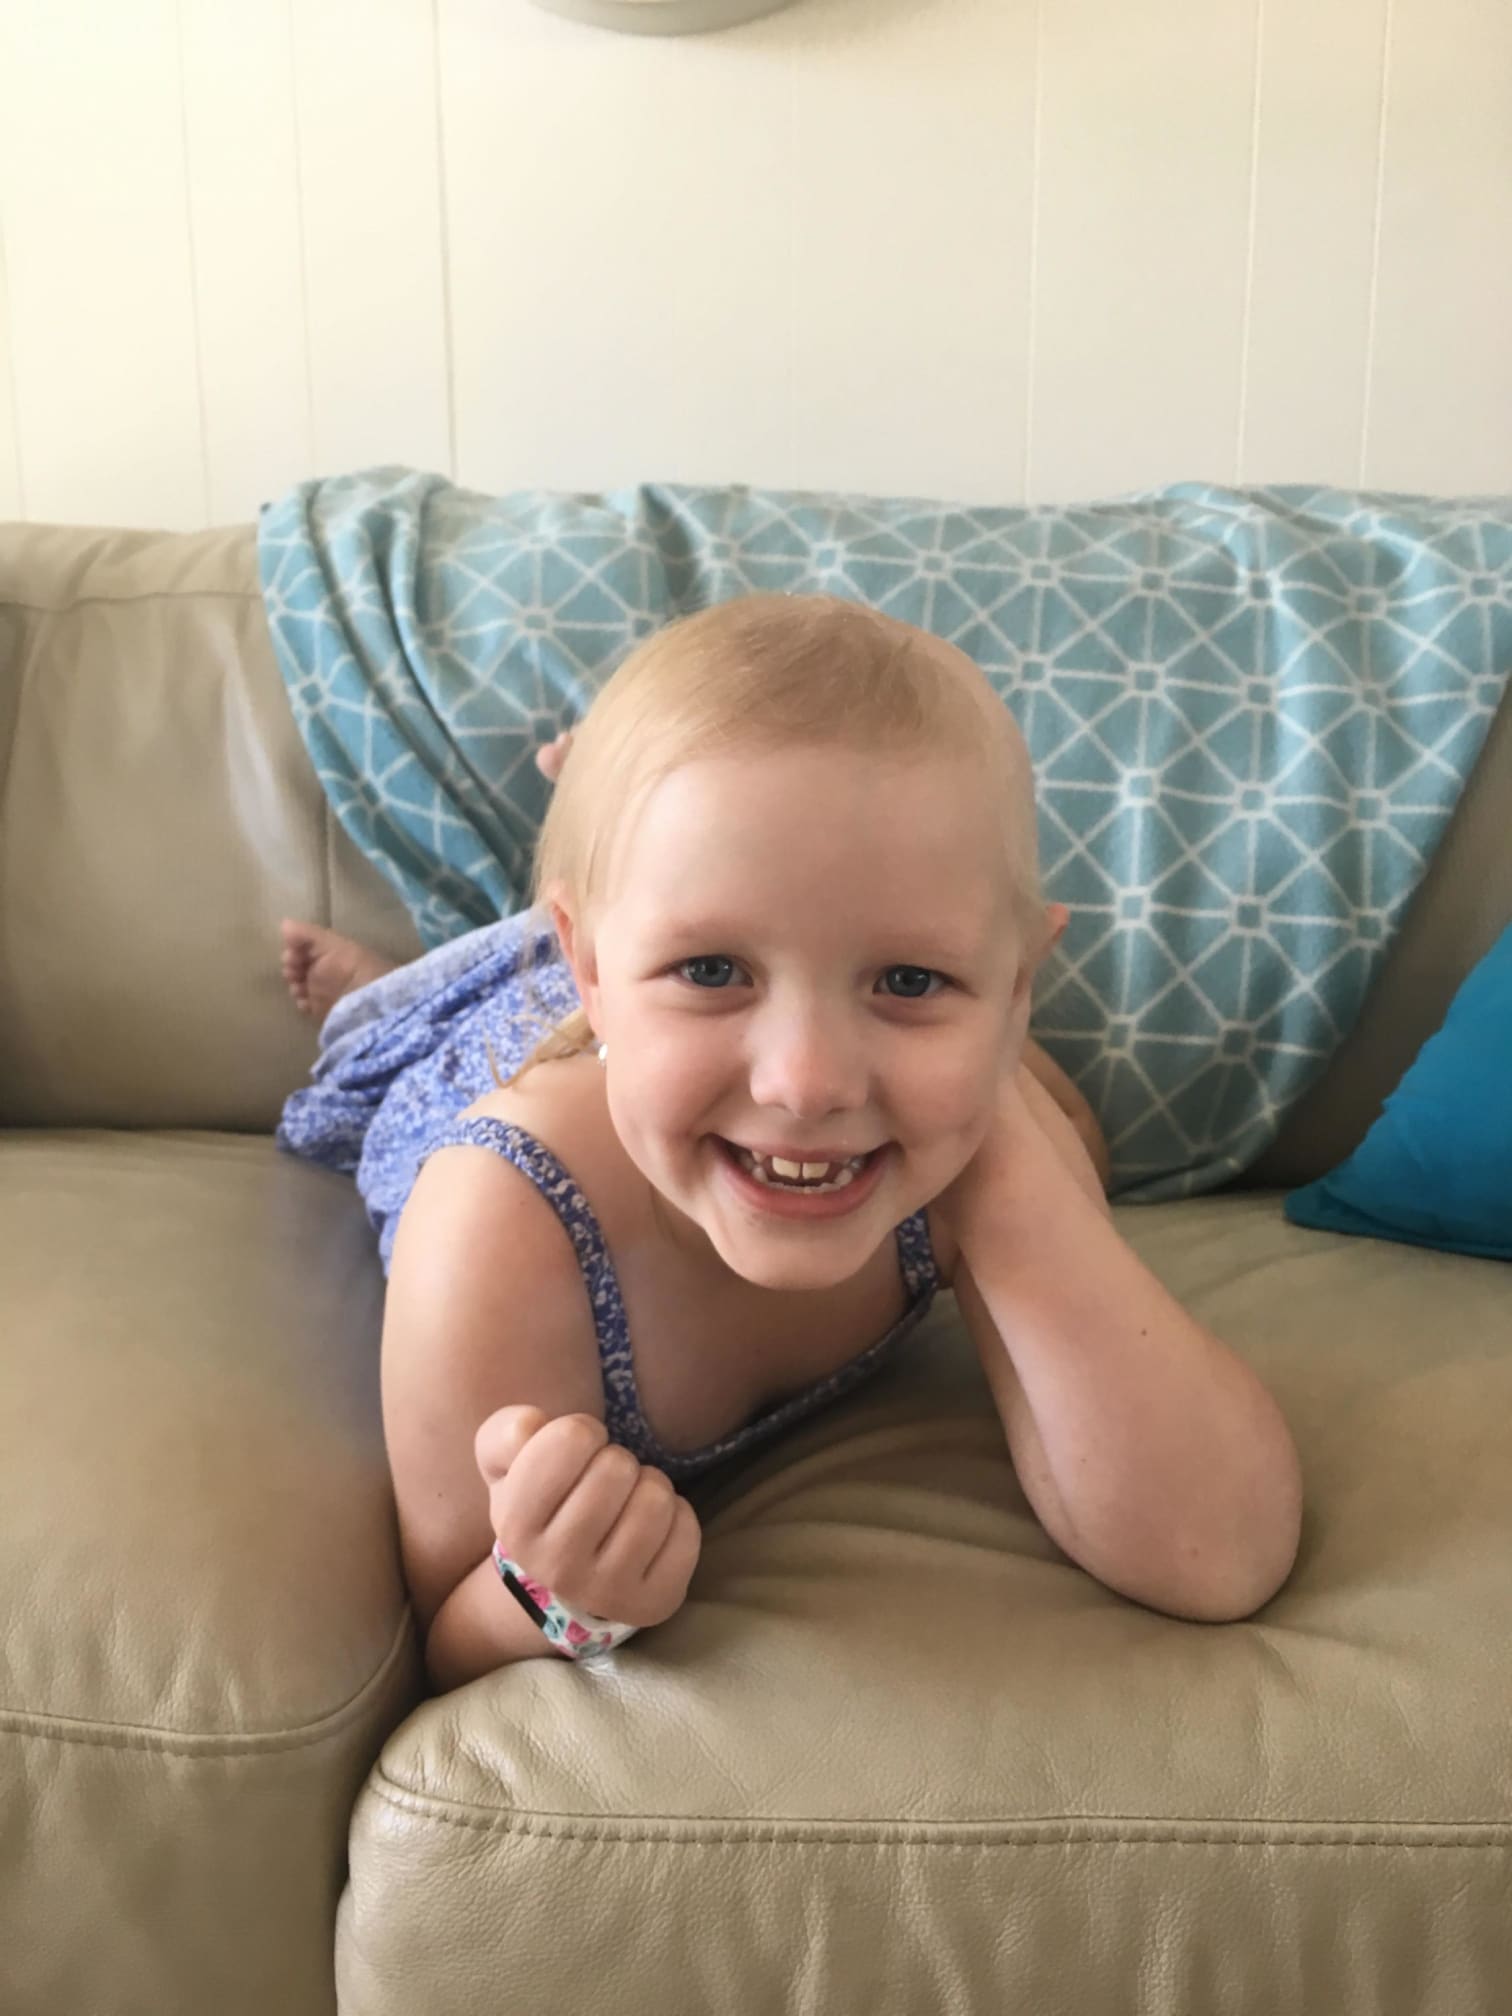 Evie smiling with bracelet